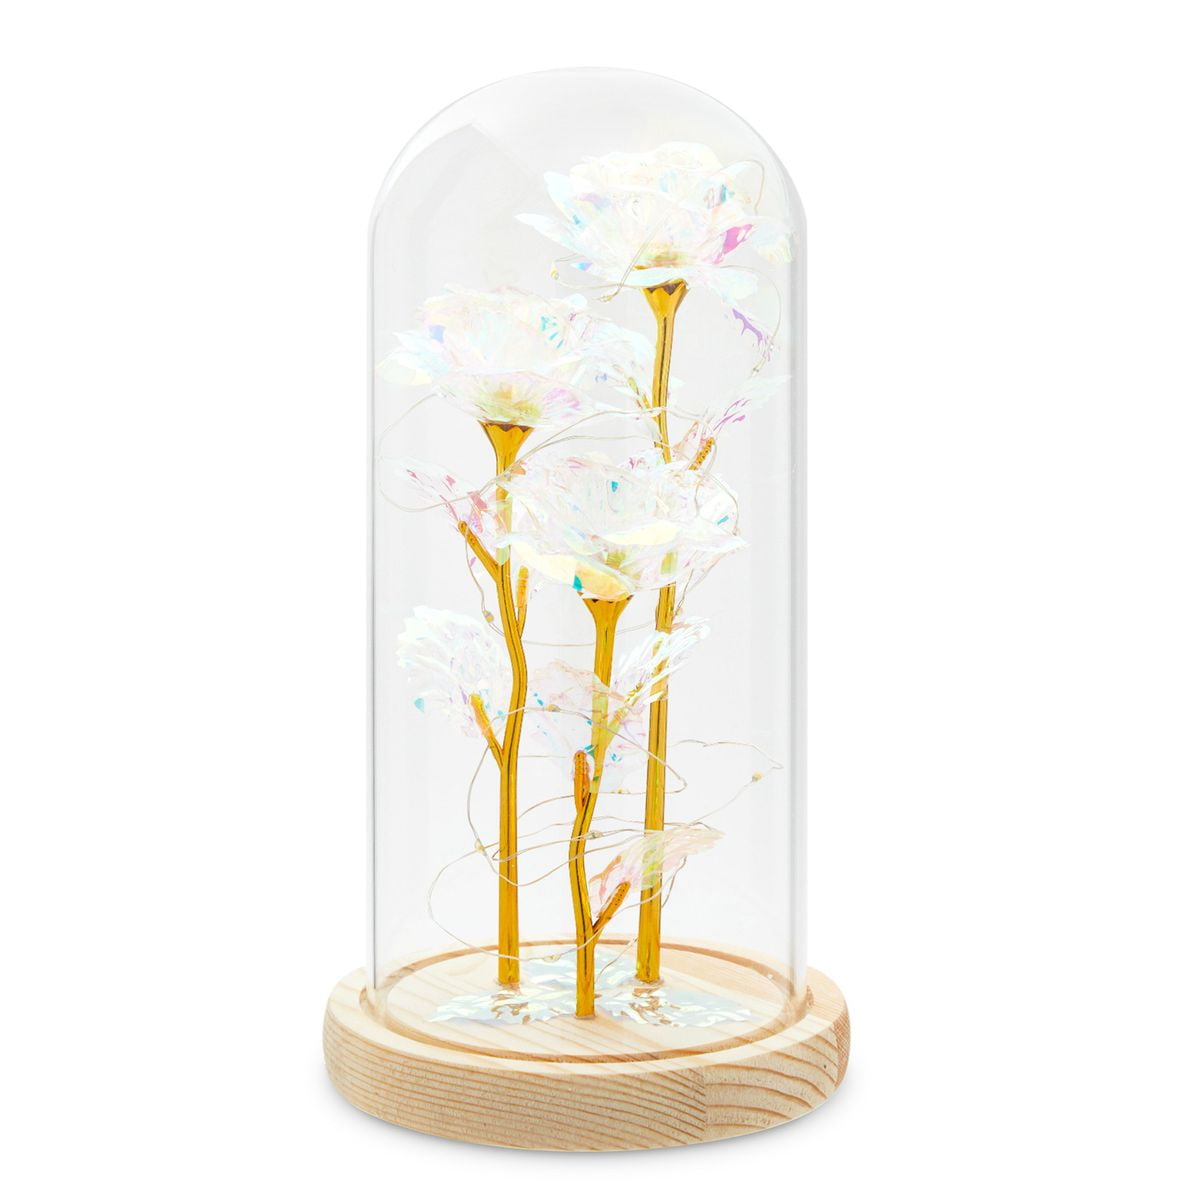 Galaxy Enchanted Rose in Glass Dome, LED Light Up Eternal Rose for Bedroom Decor, Valentine's Day Gift, White, 5.7 x 10.8 in